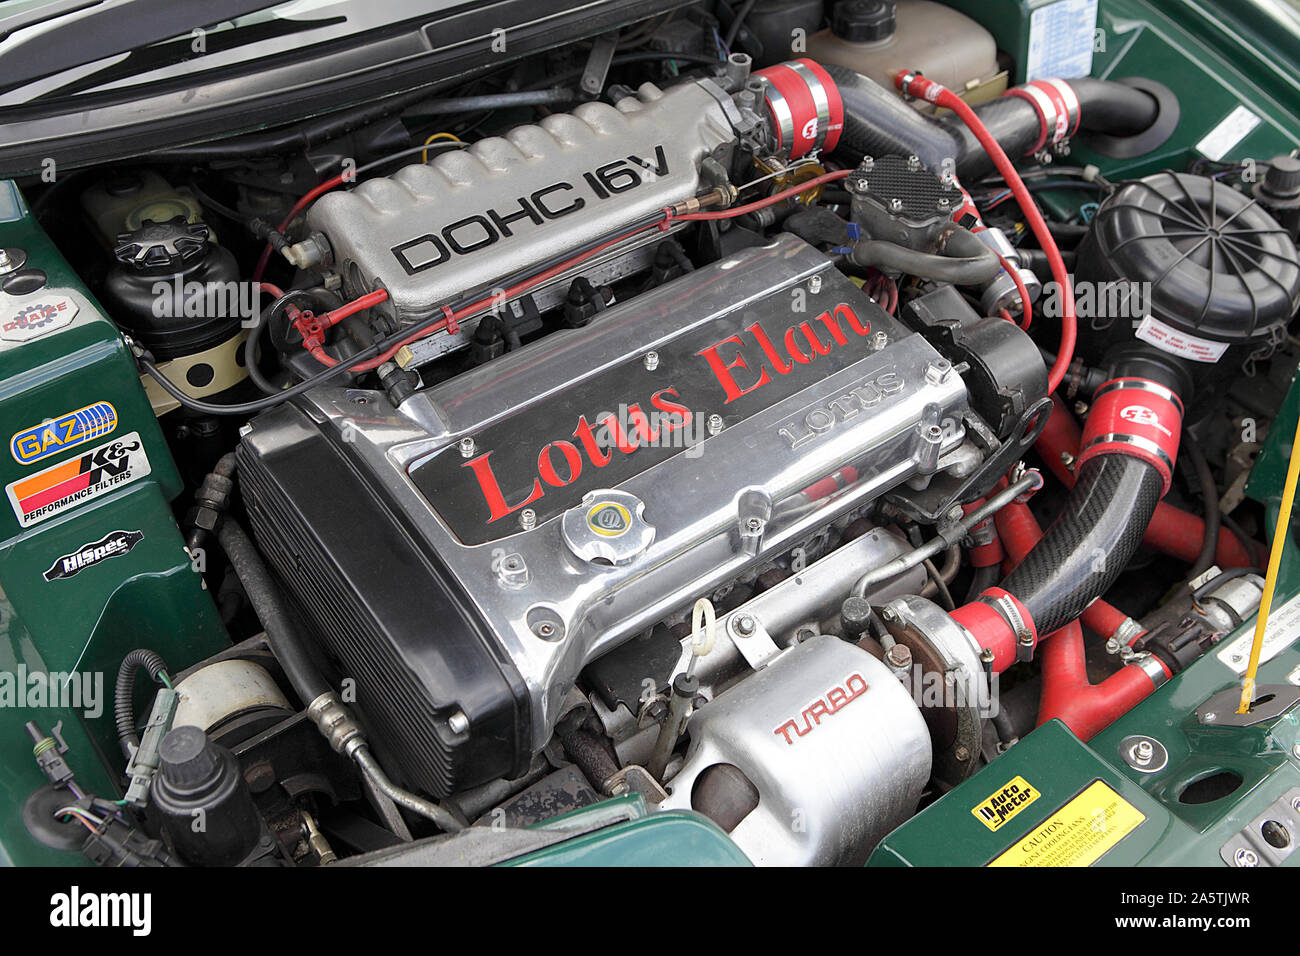 Viewed here is the engine compartment of an Lotus Elan Sports Car, on display in Shrewsbury, Shropshire, England. Stock Photo